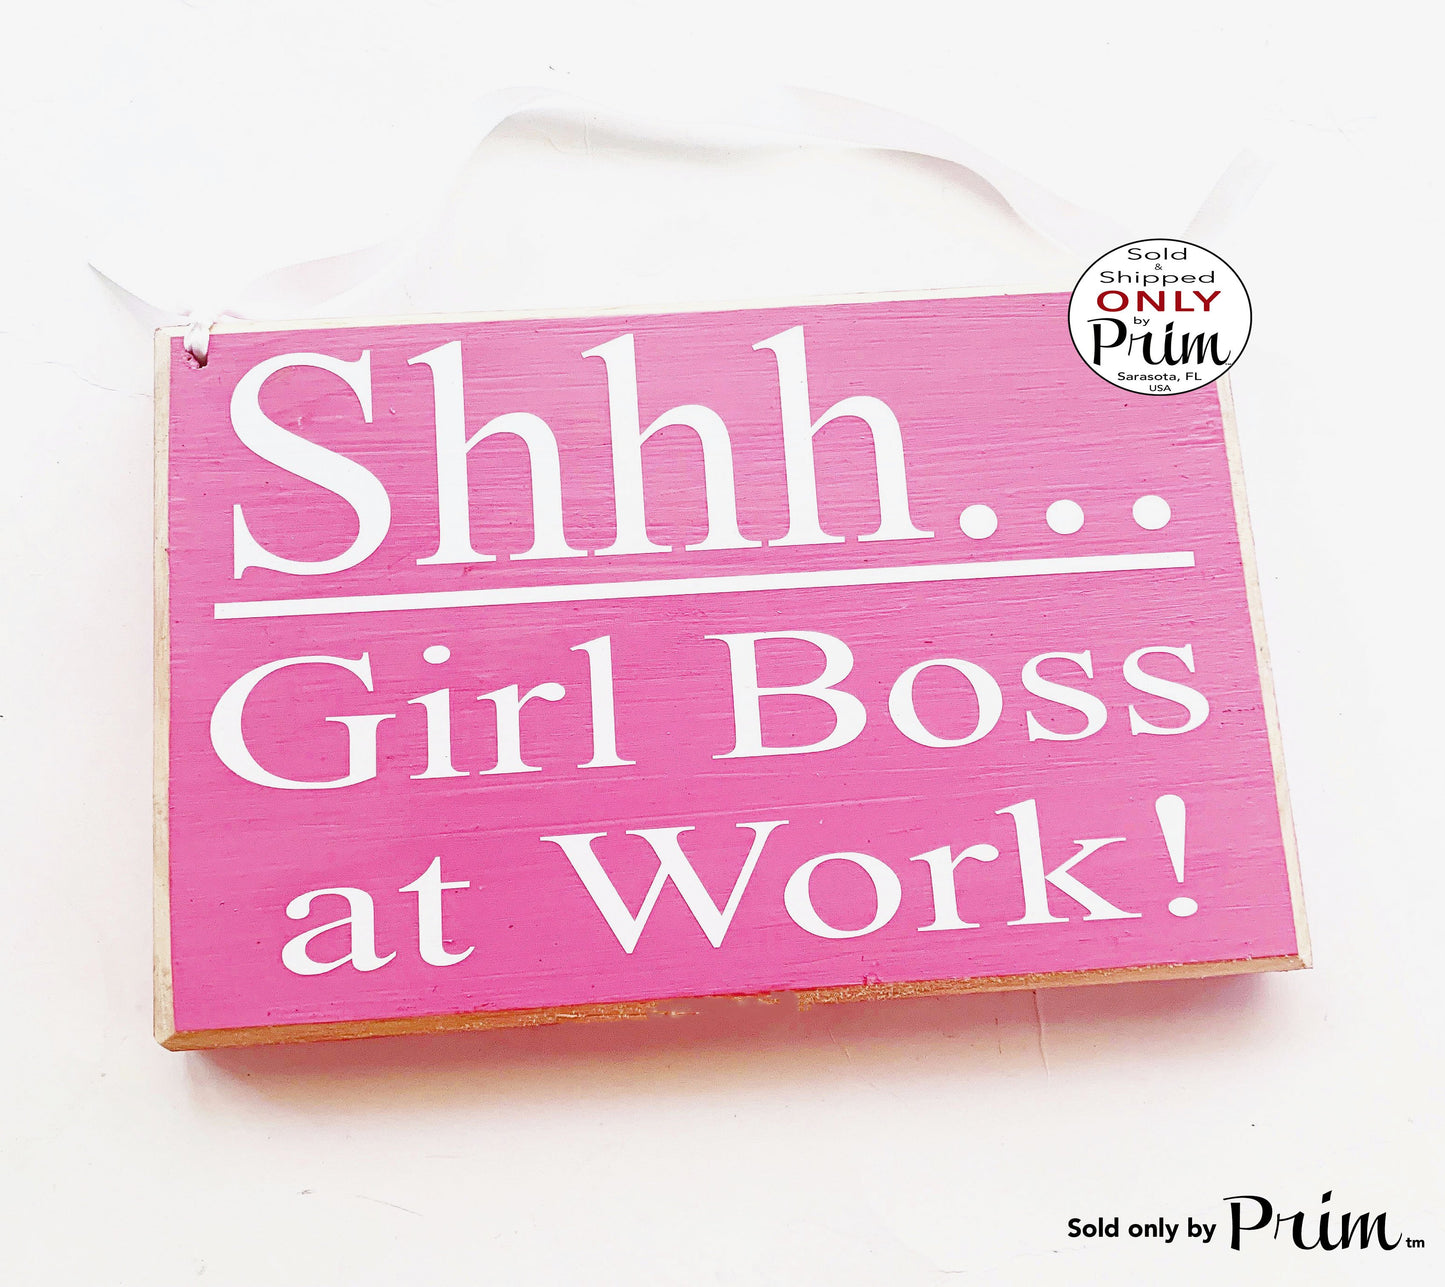 Shhh Girl Boss at Work 8x6 Custom Wood Sign In Session Progress Meeting Please Do Not Disturb Soft Voices Girl Power Women Door Plaque